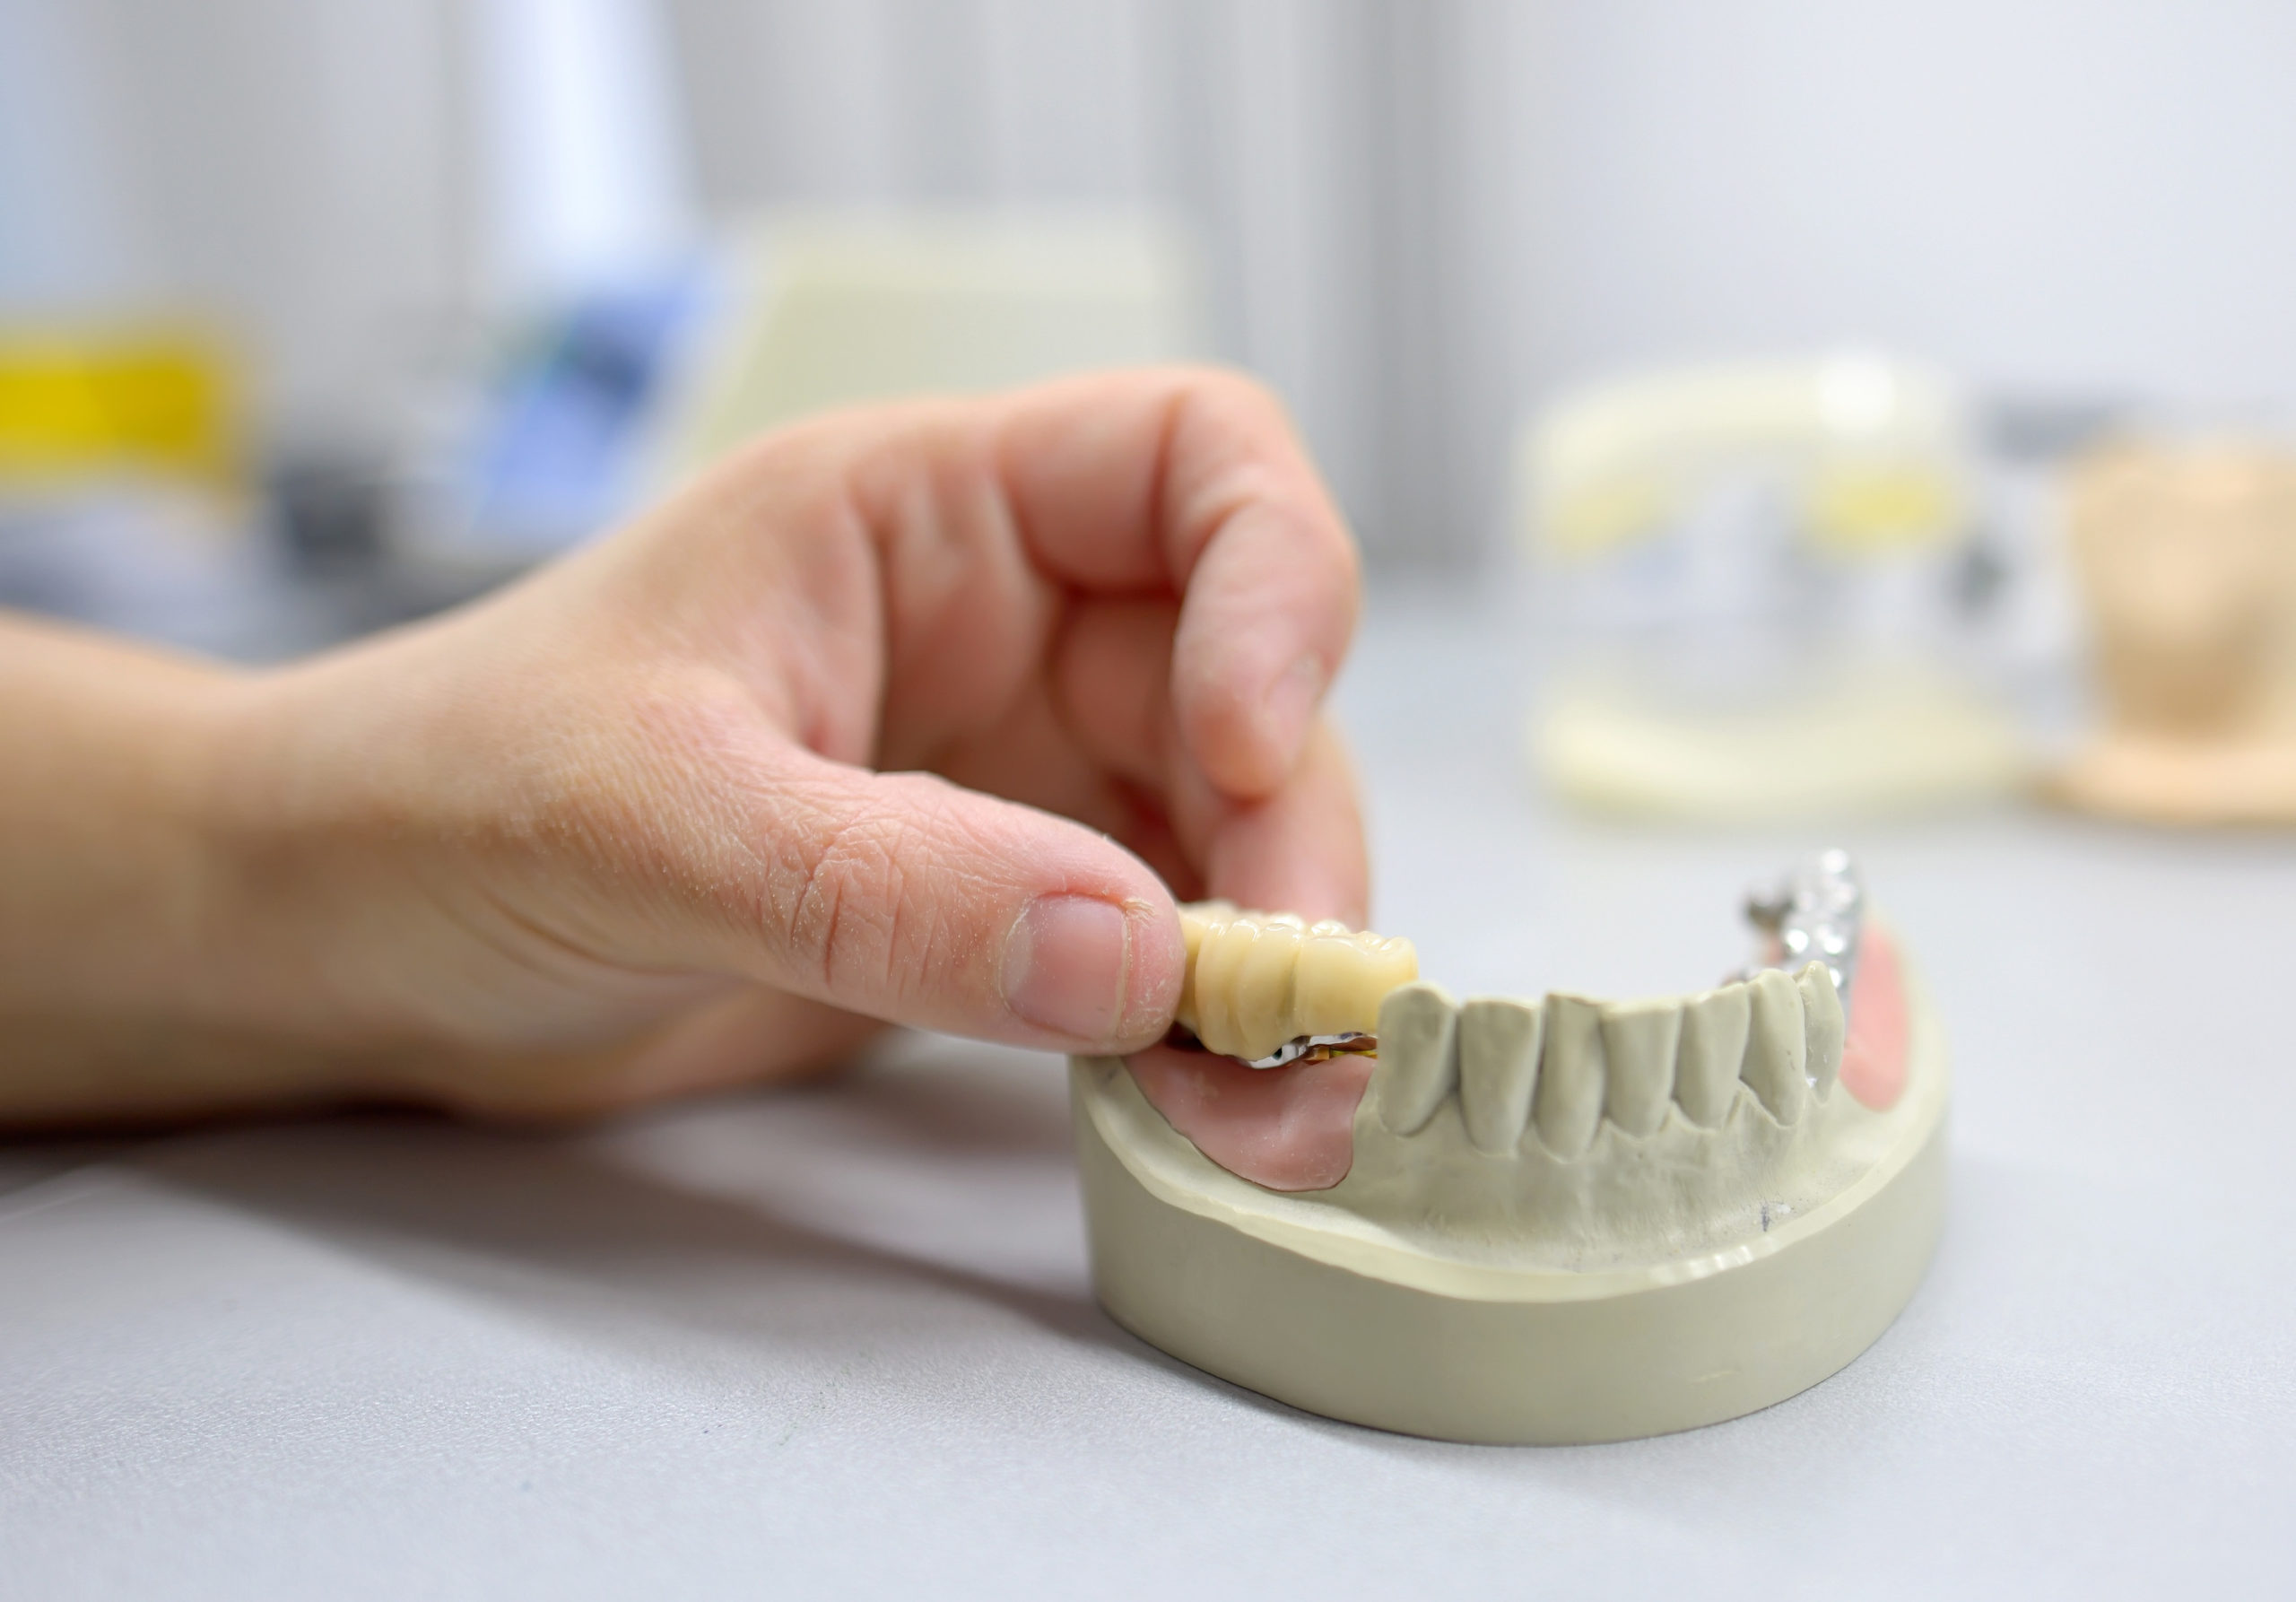 when is a dental bridge recommended